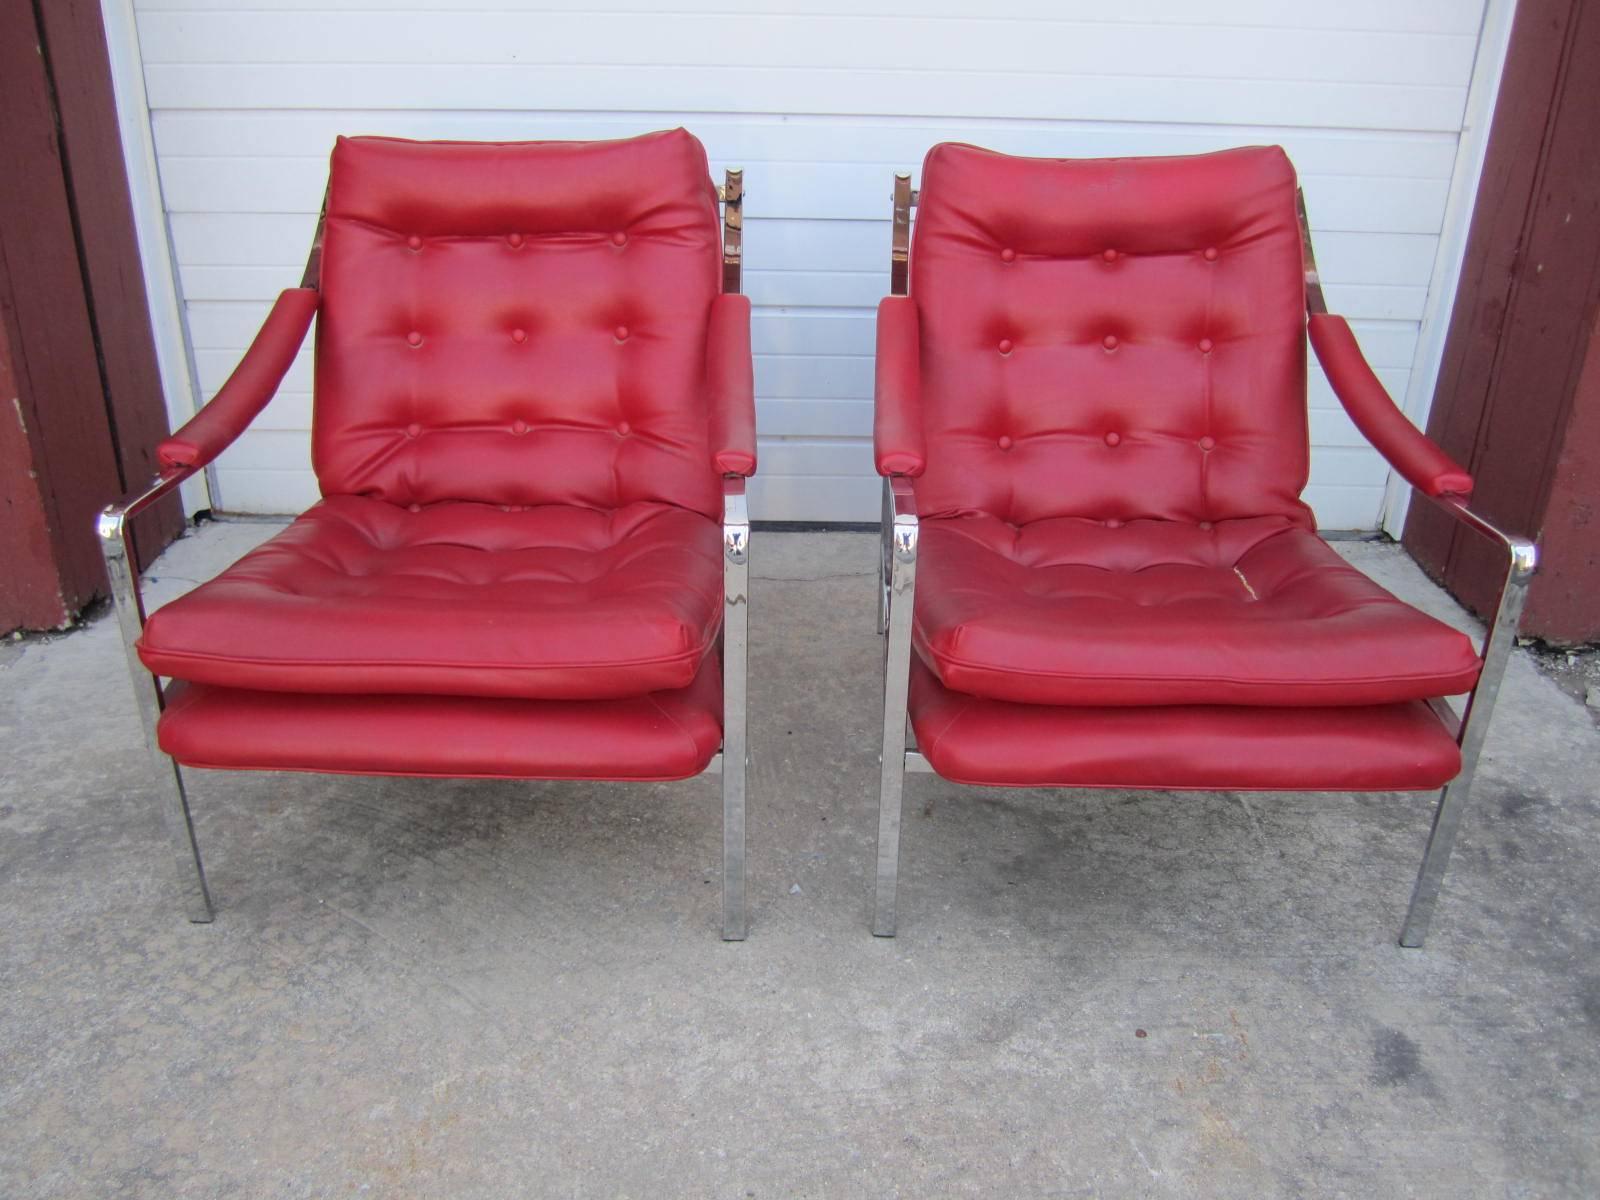 Lovely pair of Milo Baughman style chrome scoop lounge chairs. This pair will definitely need new upholstery but that's what you designers are looking for anyway right ?